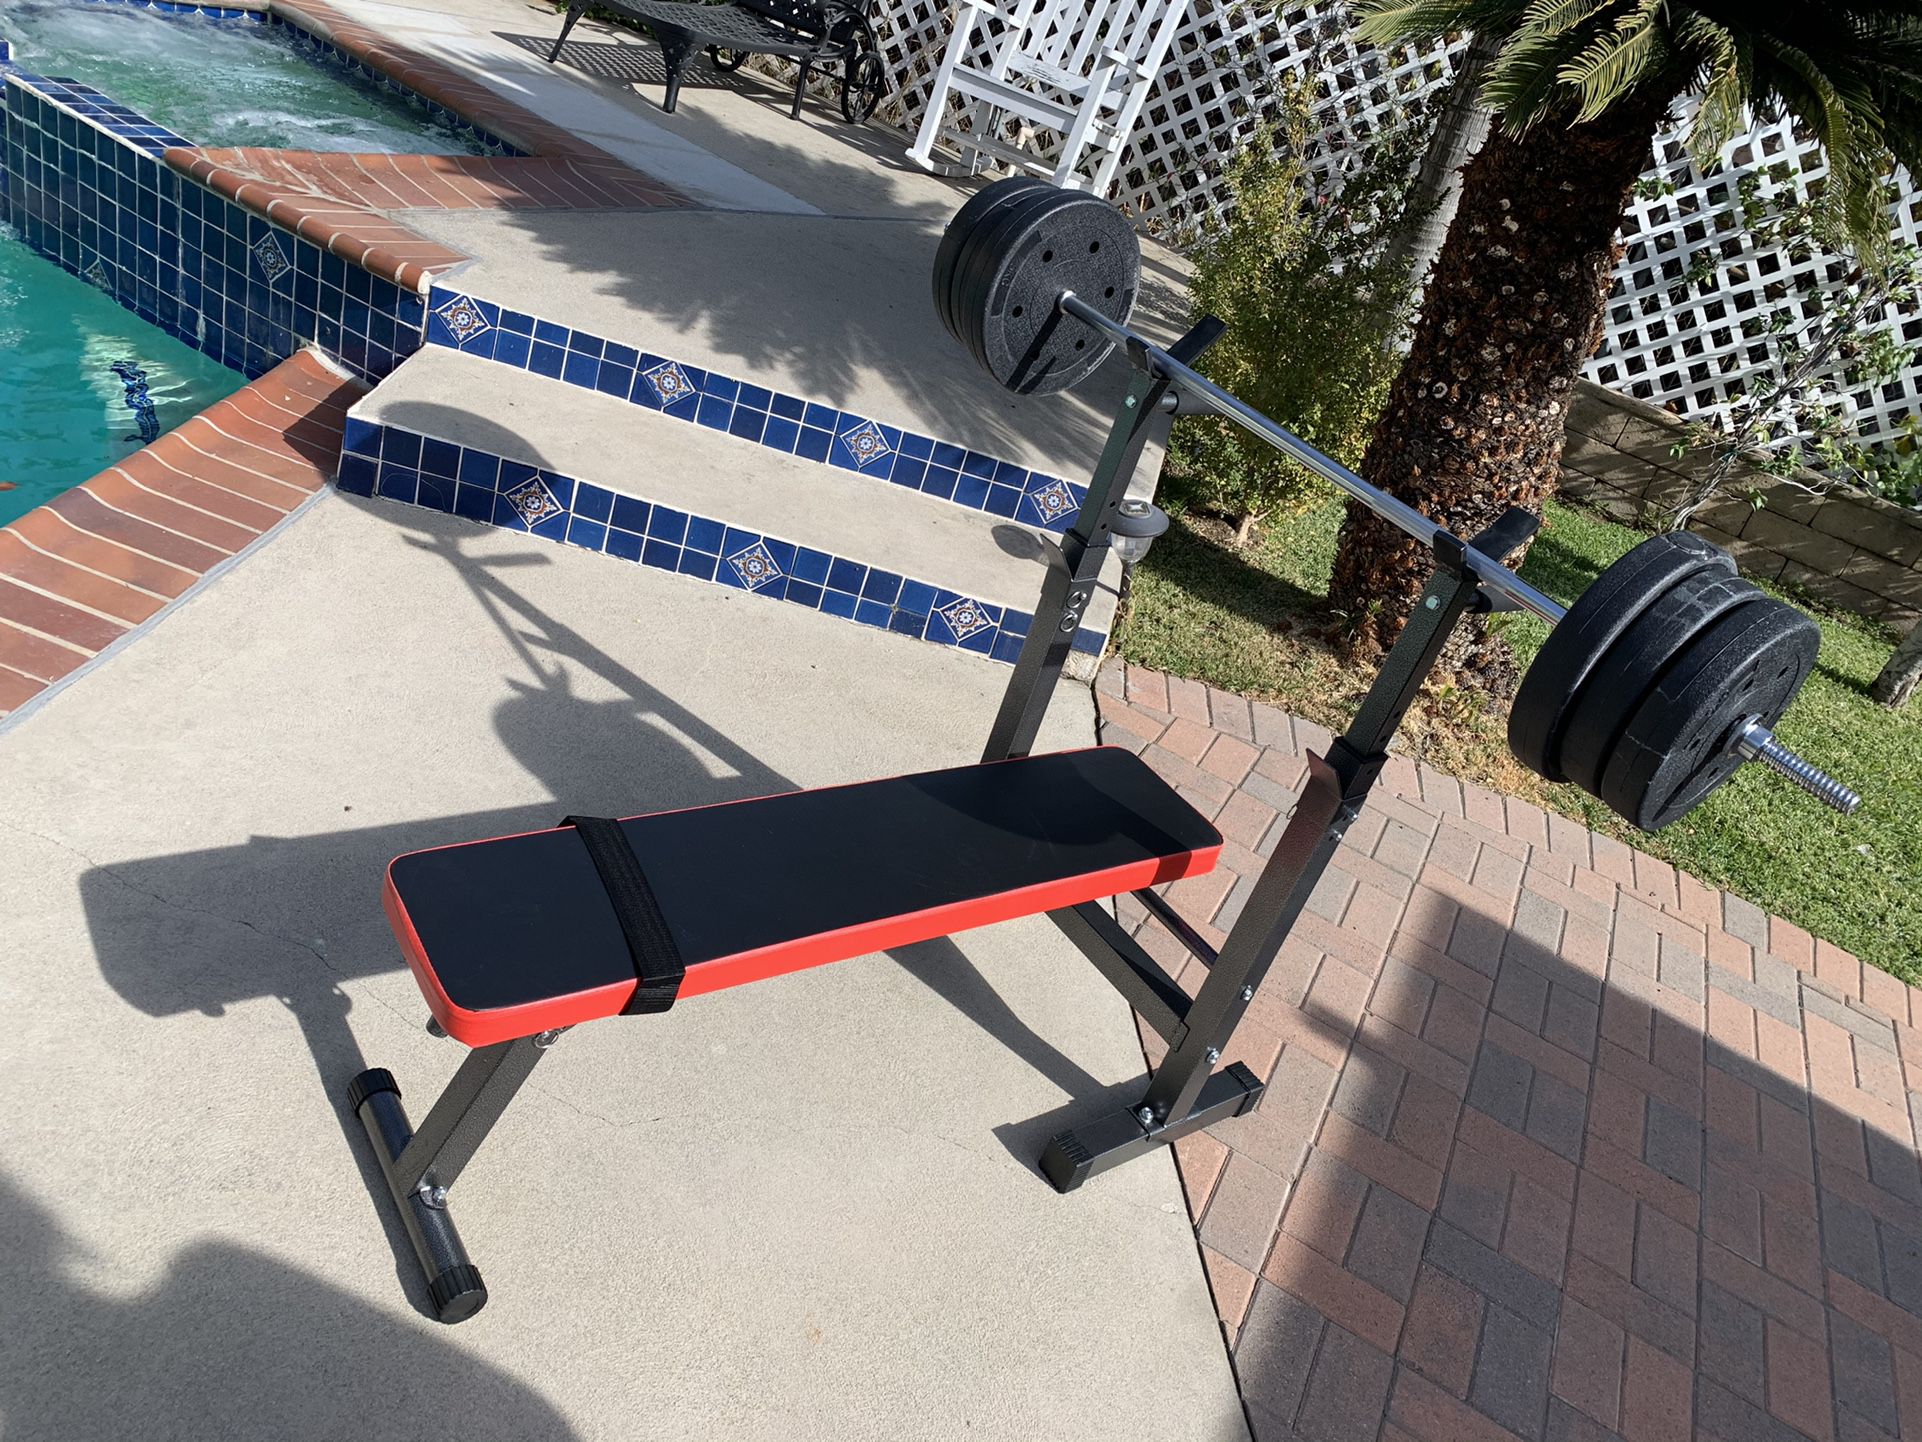 Foldable Space Saving Bench Press With Dipbars，5 foot standard barbell dumbbell handles and 95LB weight set